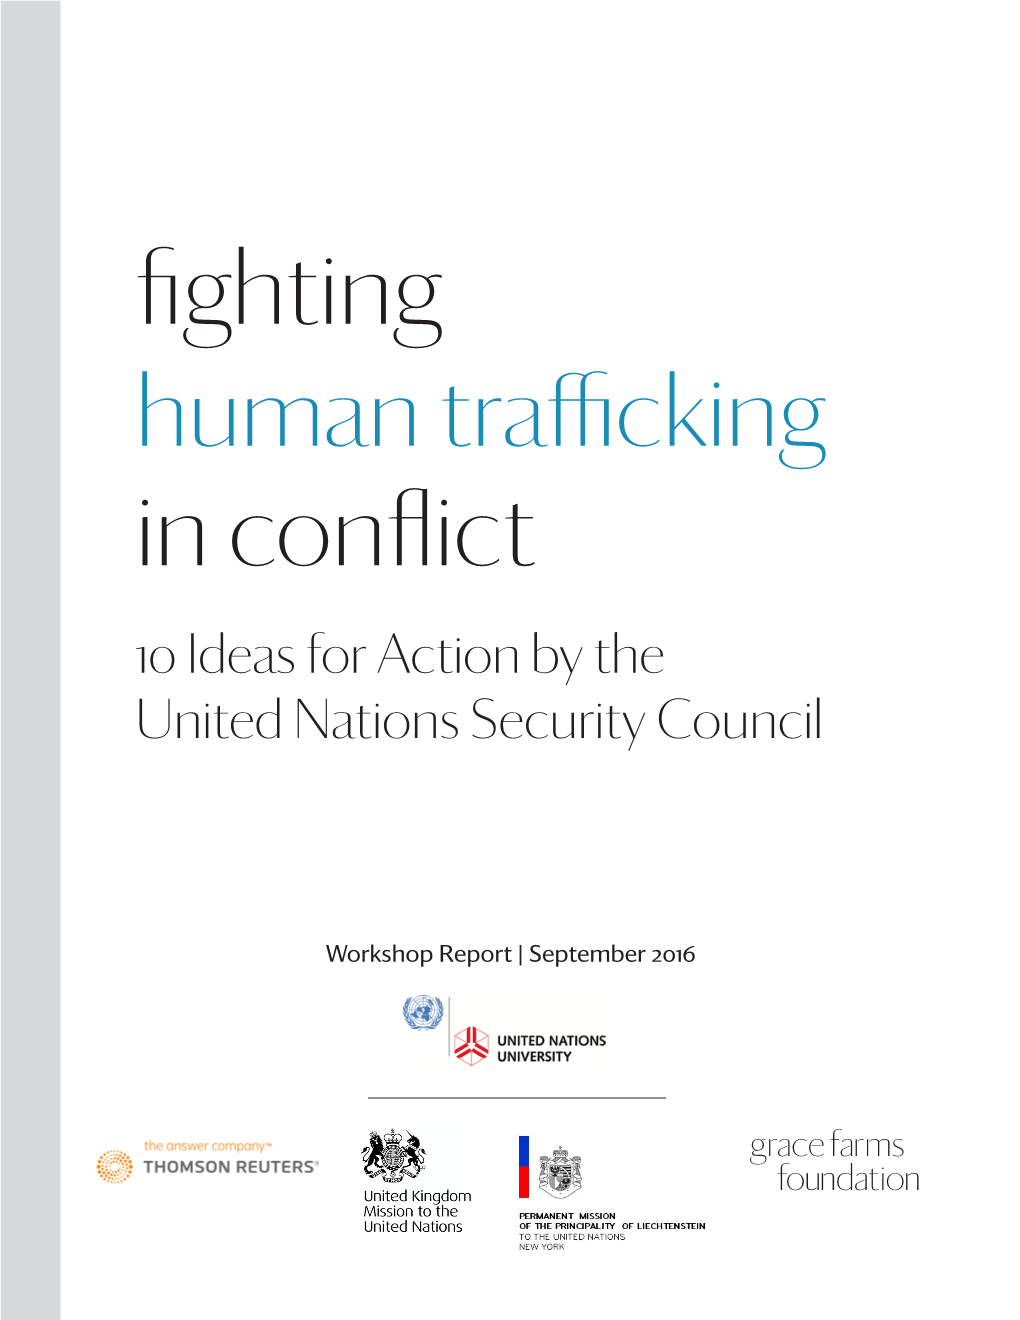 Fighting Human Trafficking in Conflict, Through Data Gathering and Sharing